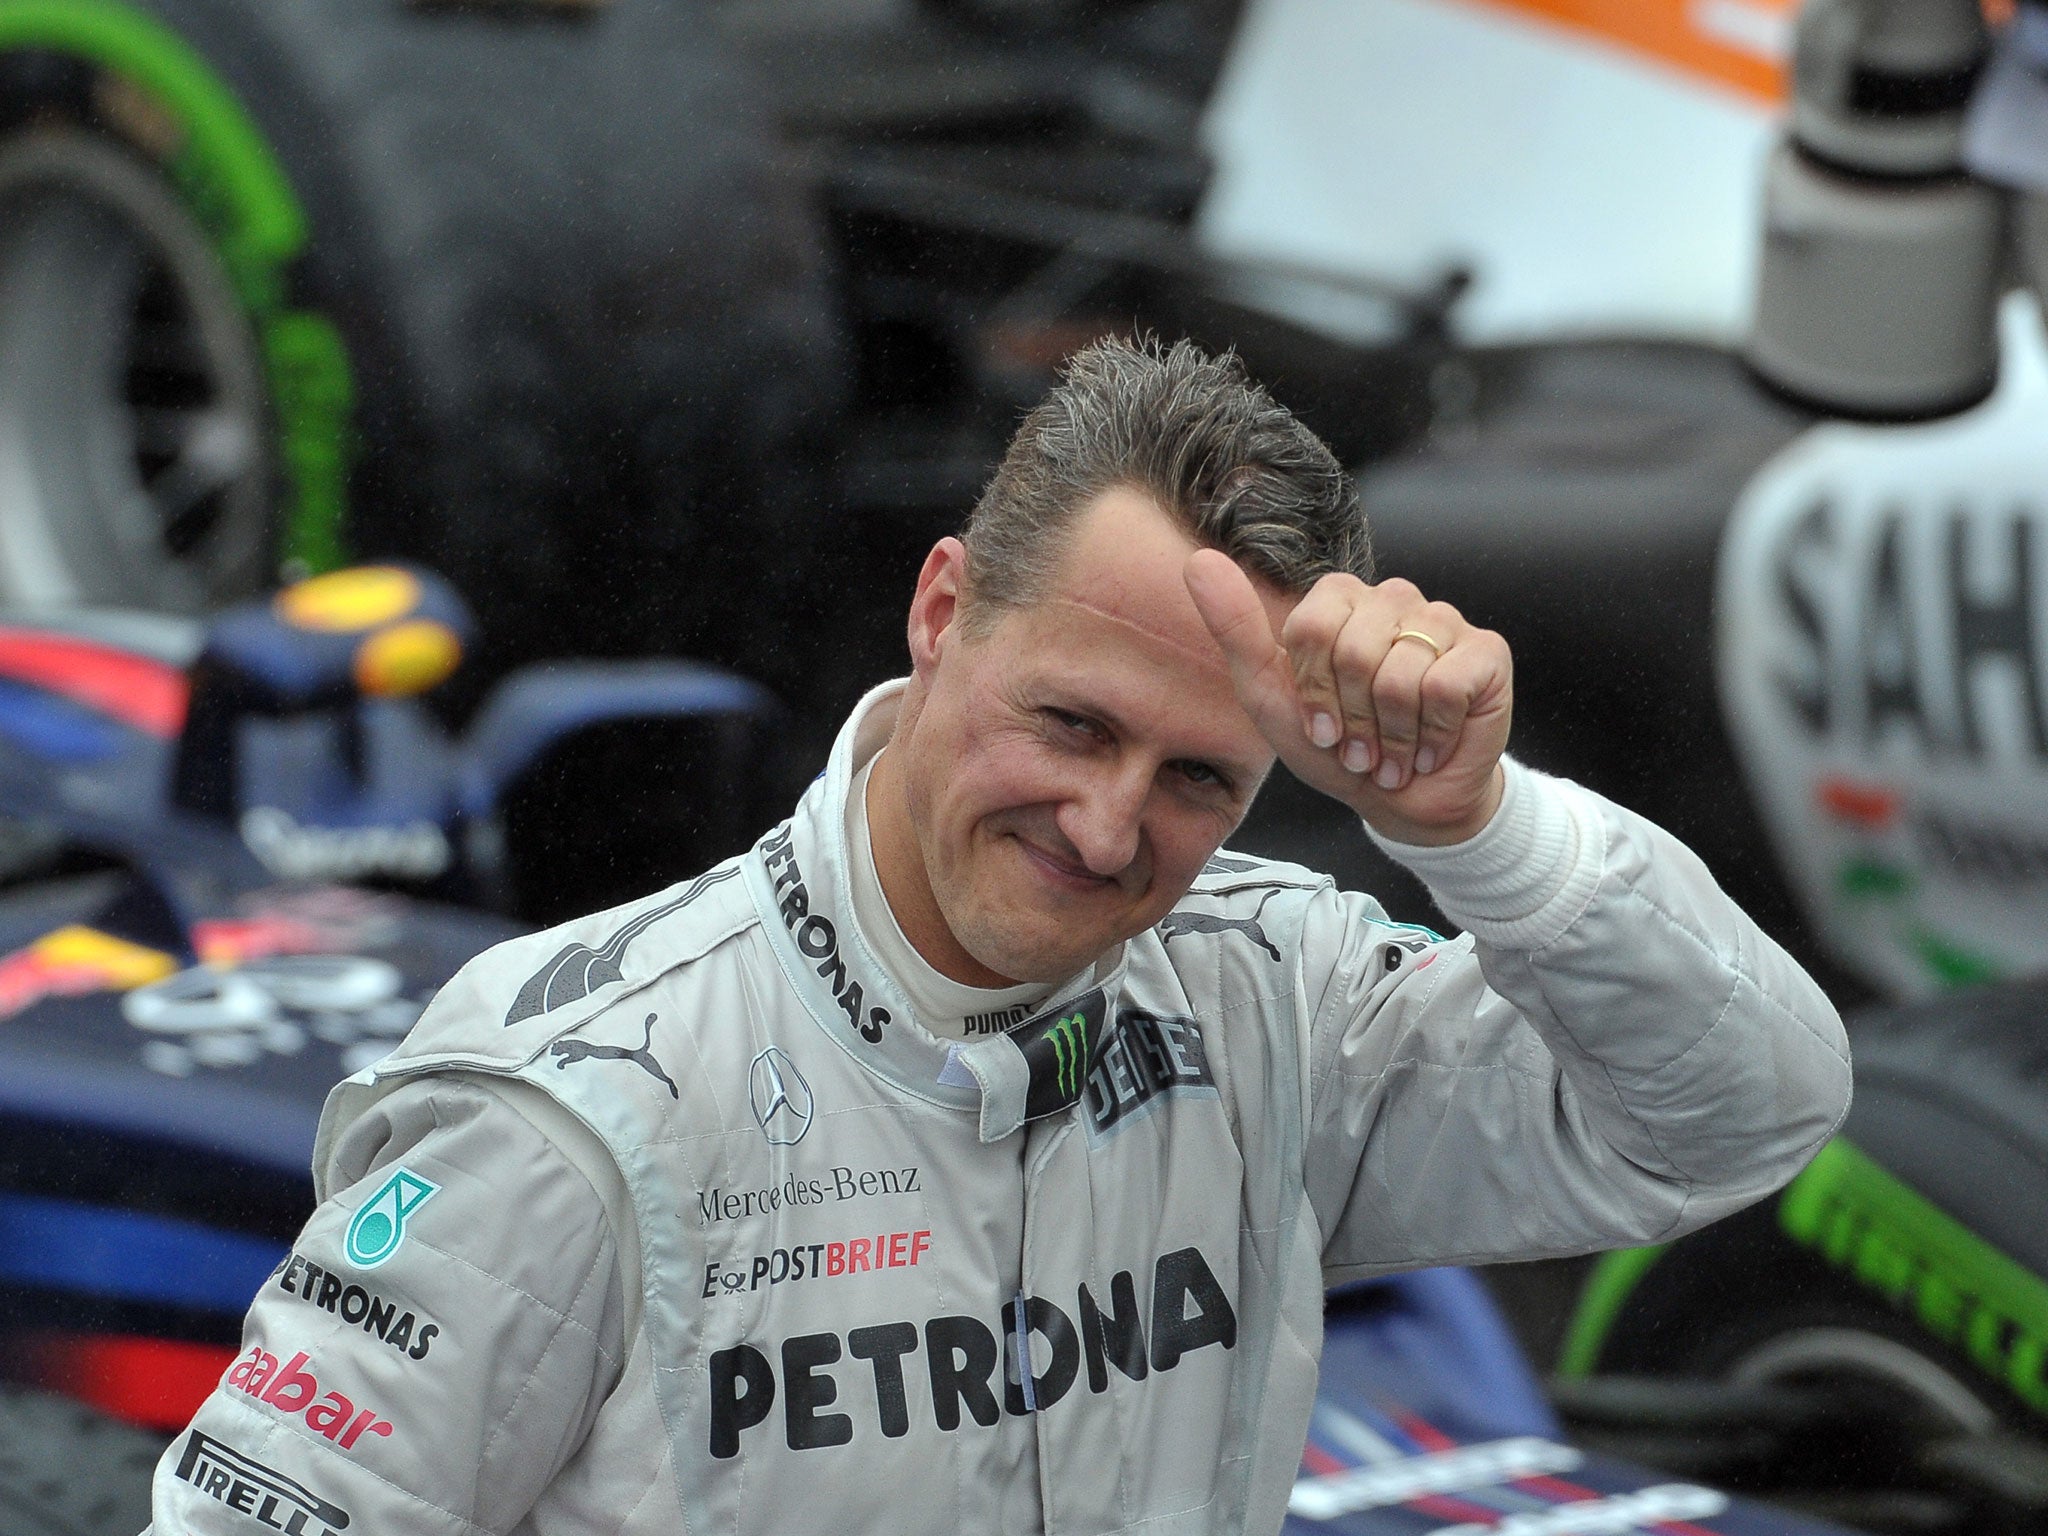 Michael Schumacher remains in a medically-induced coma following his skiing accident in December